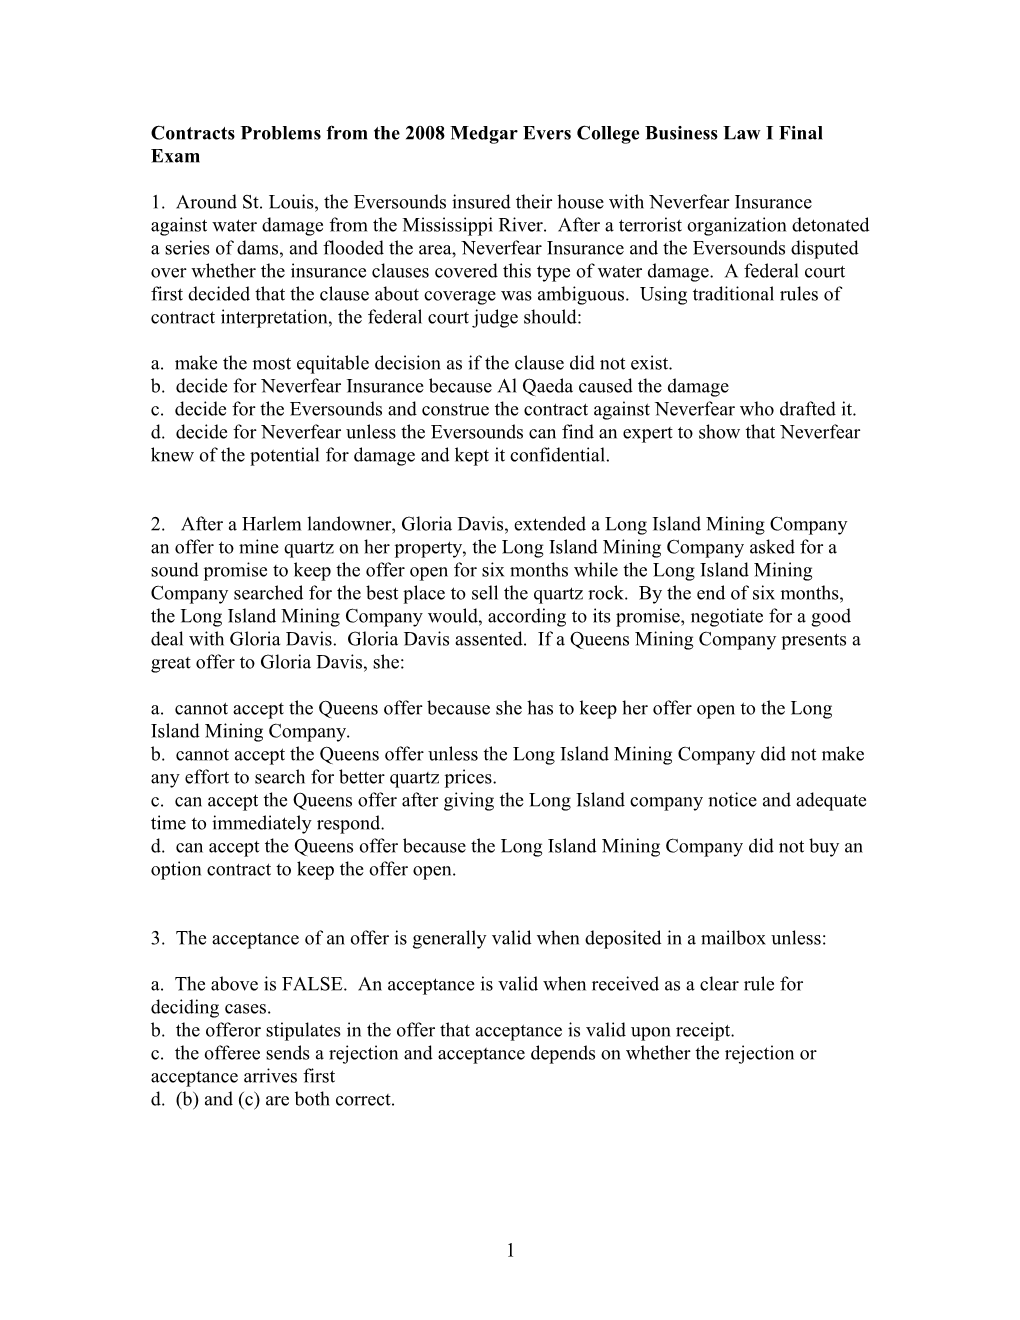 Contracts Problems from the 2008 Medgar Evers College Business Law I Final Exam